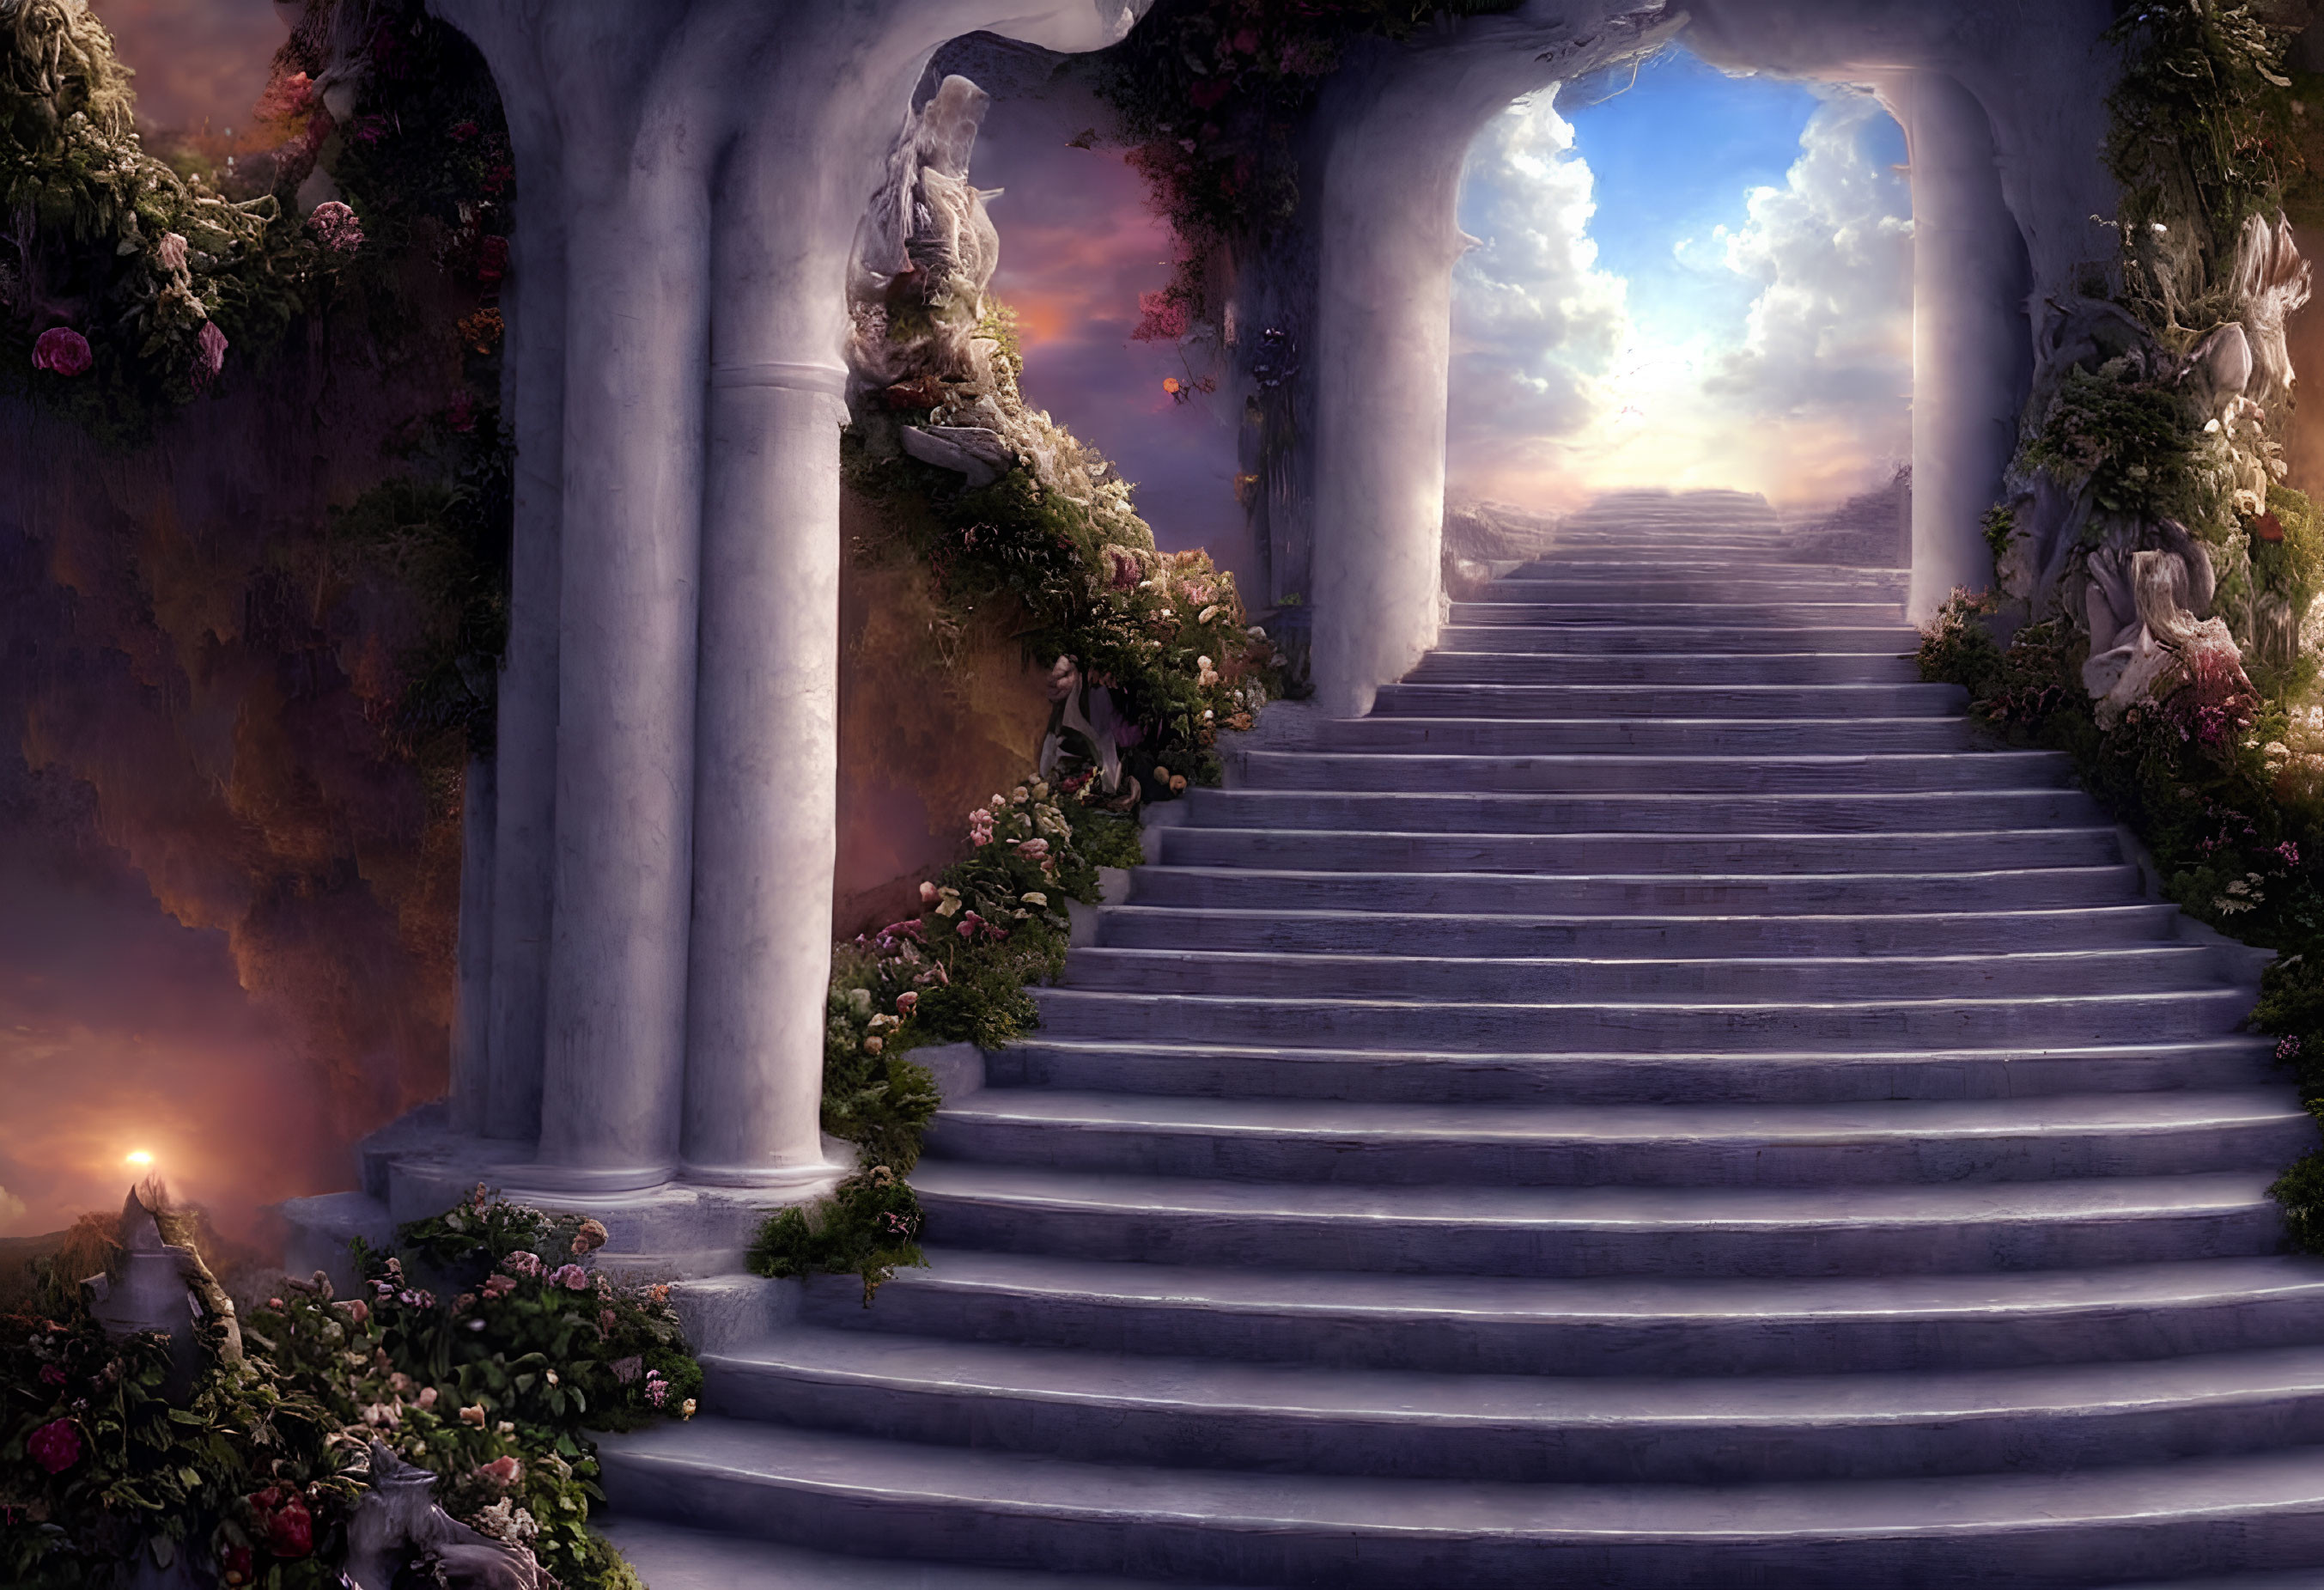 Grand stairway with columns and statues under heavenly sky and blooming flowers